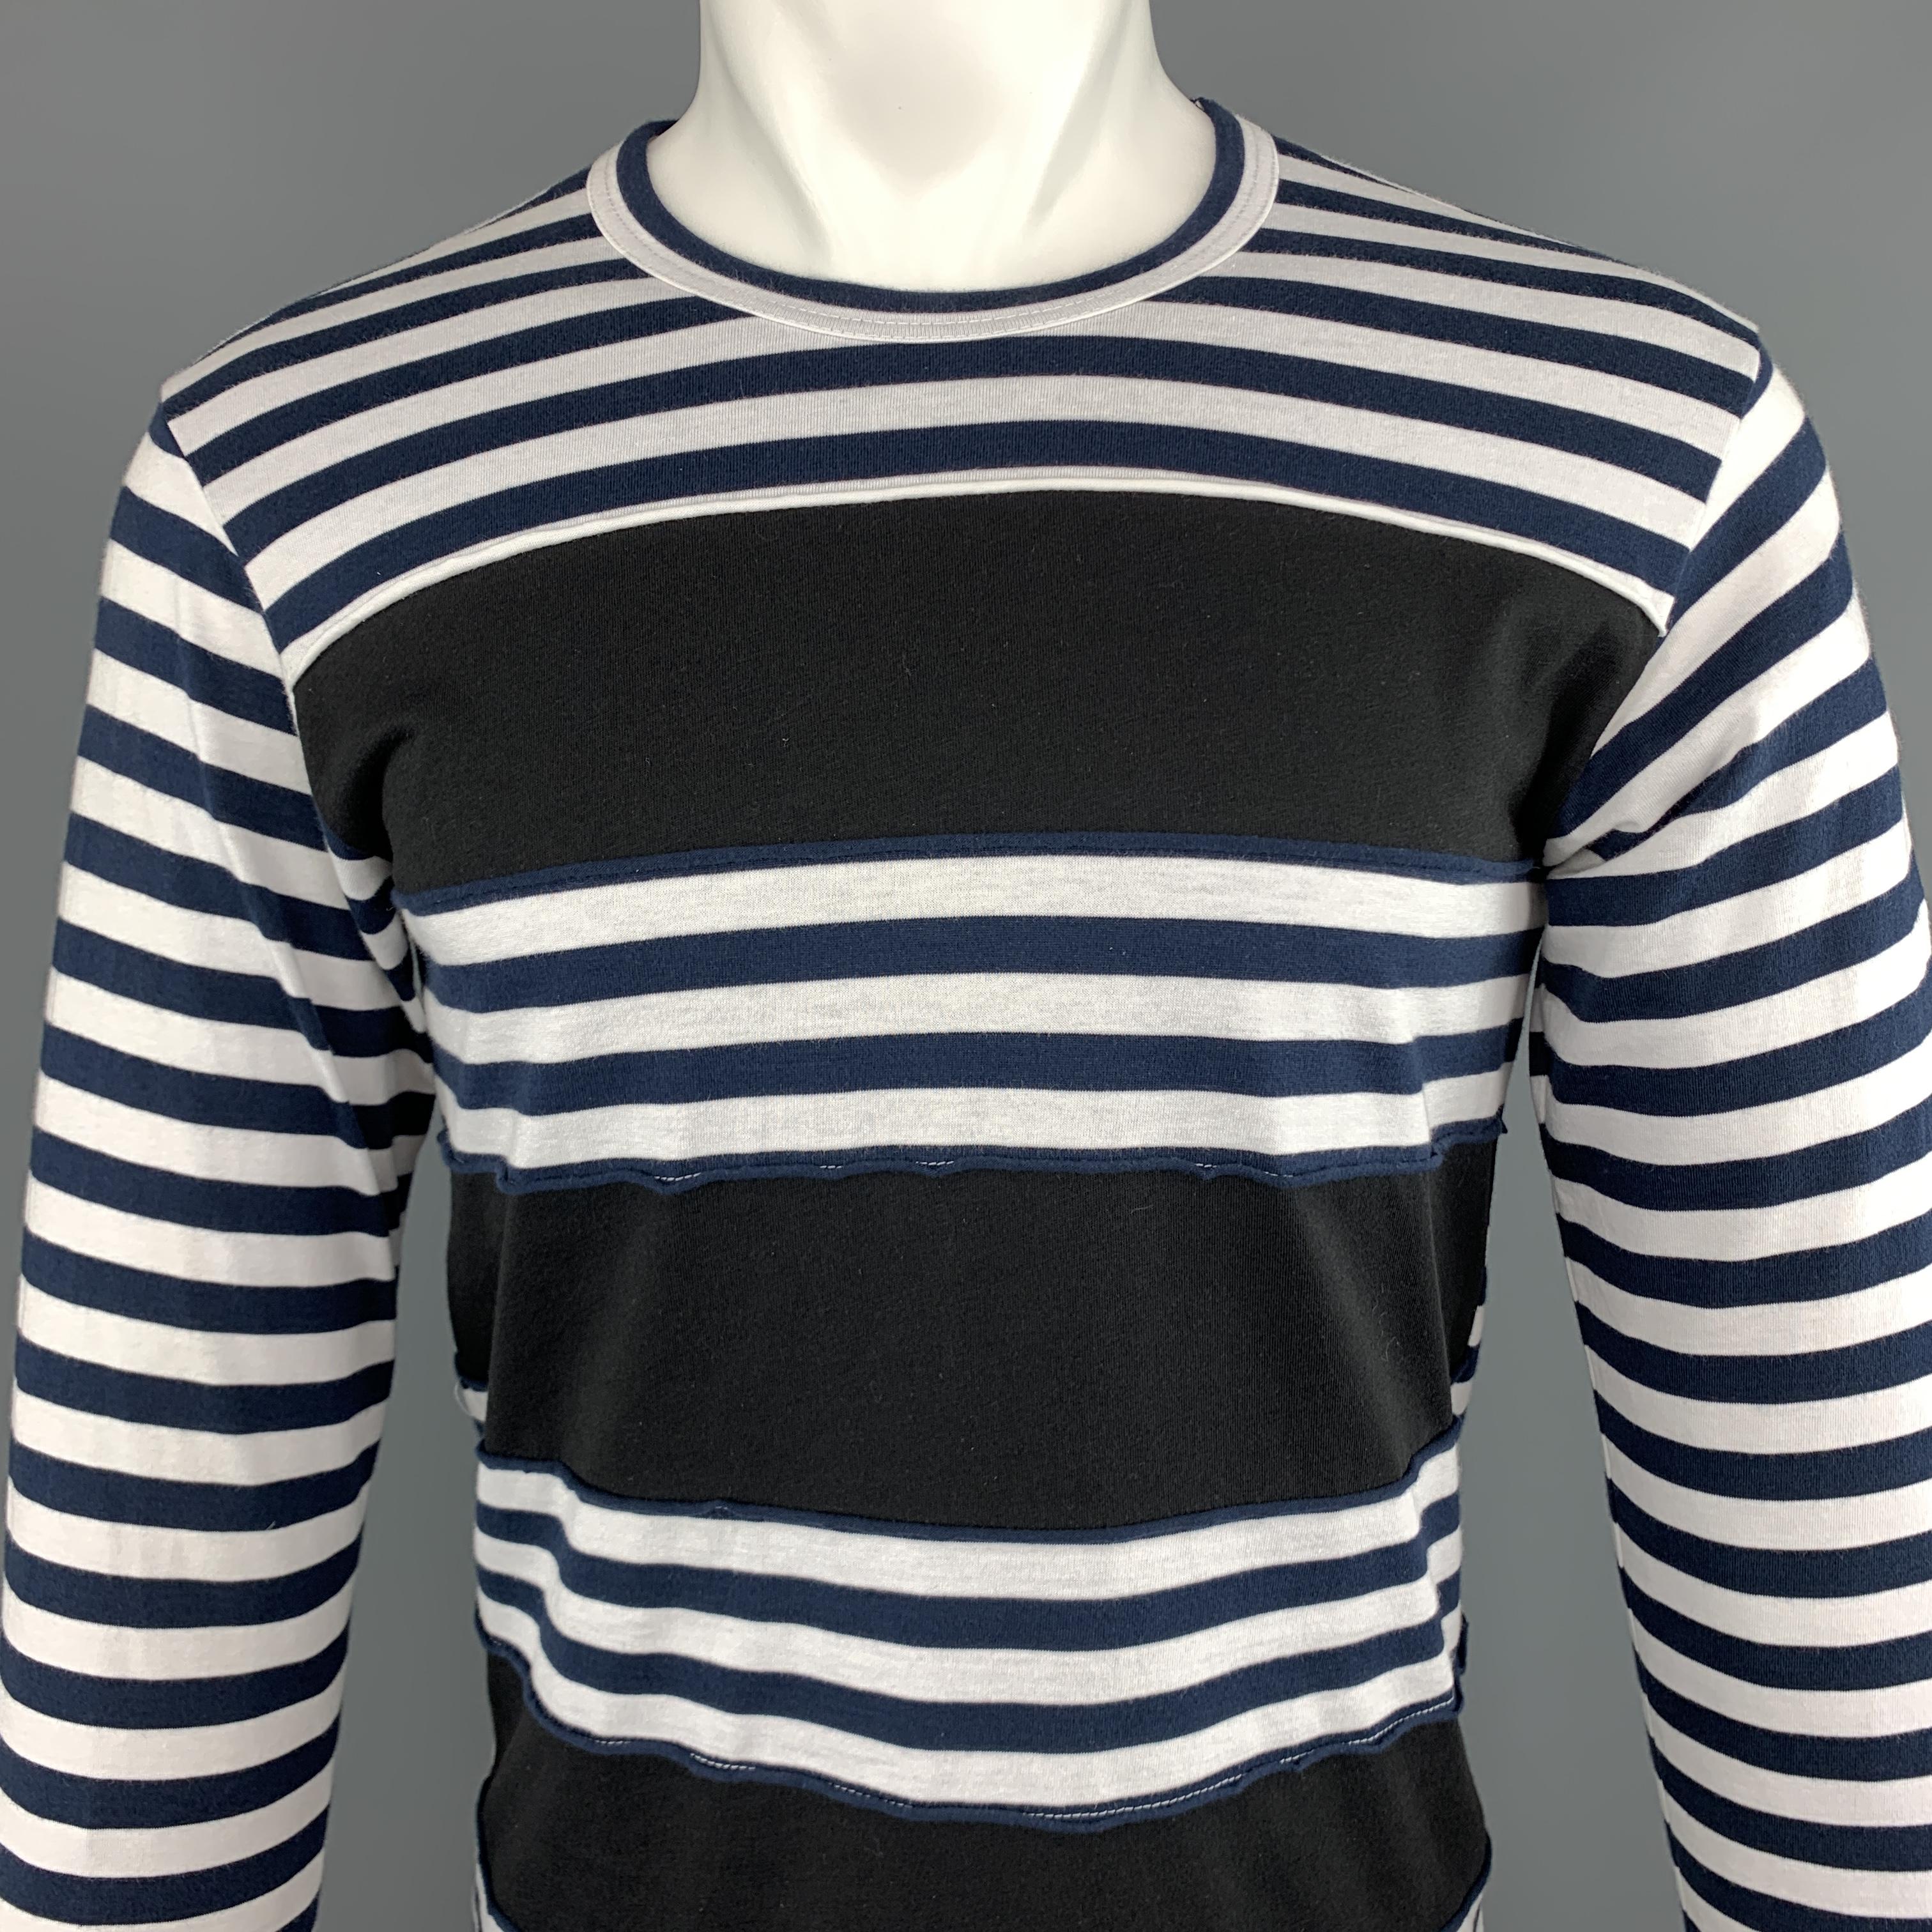 COMME des GARCONS SHIRT long sleeve tee comes in navy and white striped cotton jersey with frayed black stripe panels and crewneck.
 
New with Tags.
Marked: S
 
Measurements:
 
Shoulder: 17 in.
Chest: 17 in.
Sleeve: 25 in.
Length: 27 in.